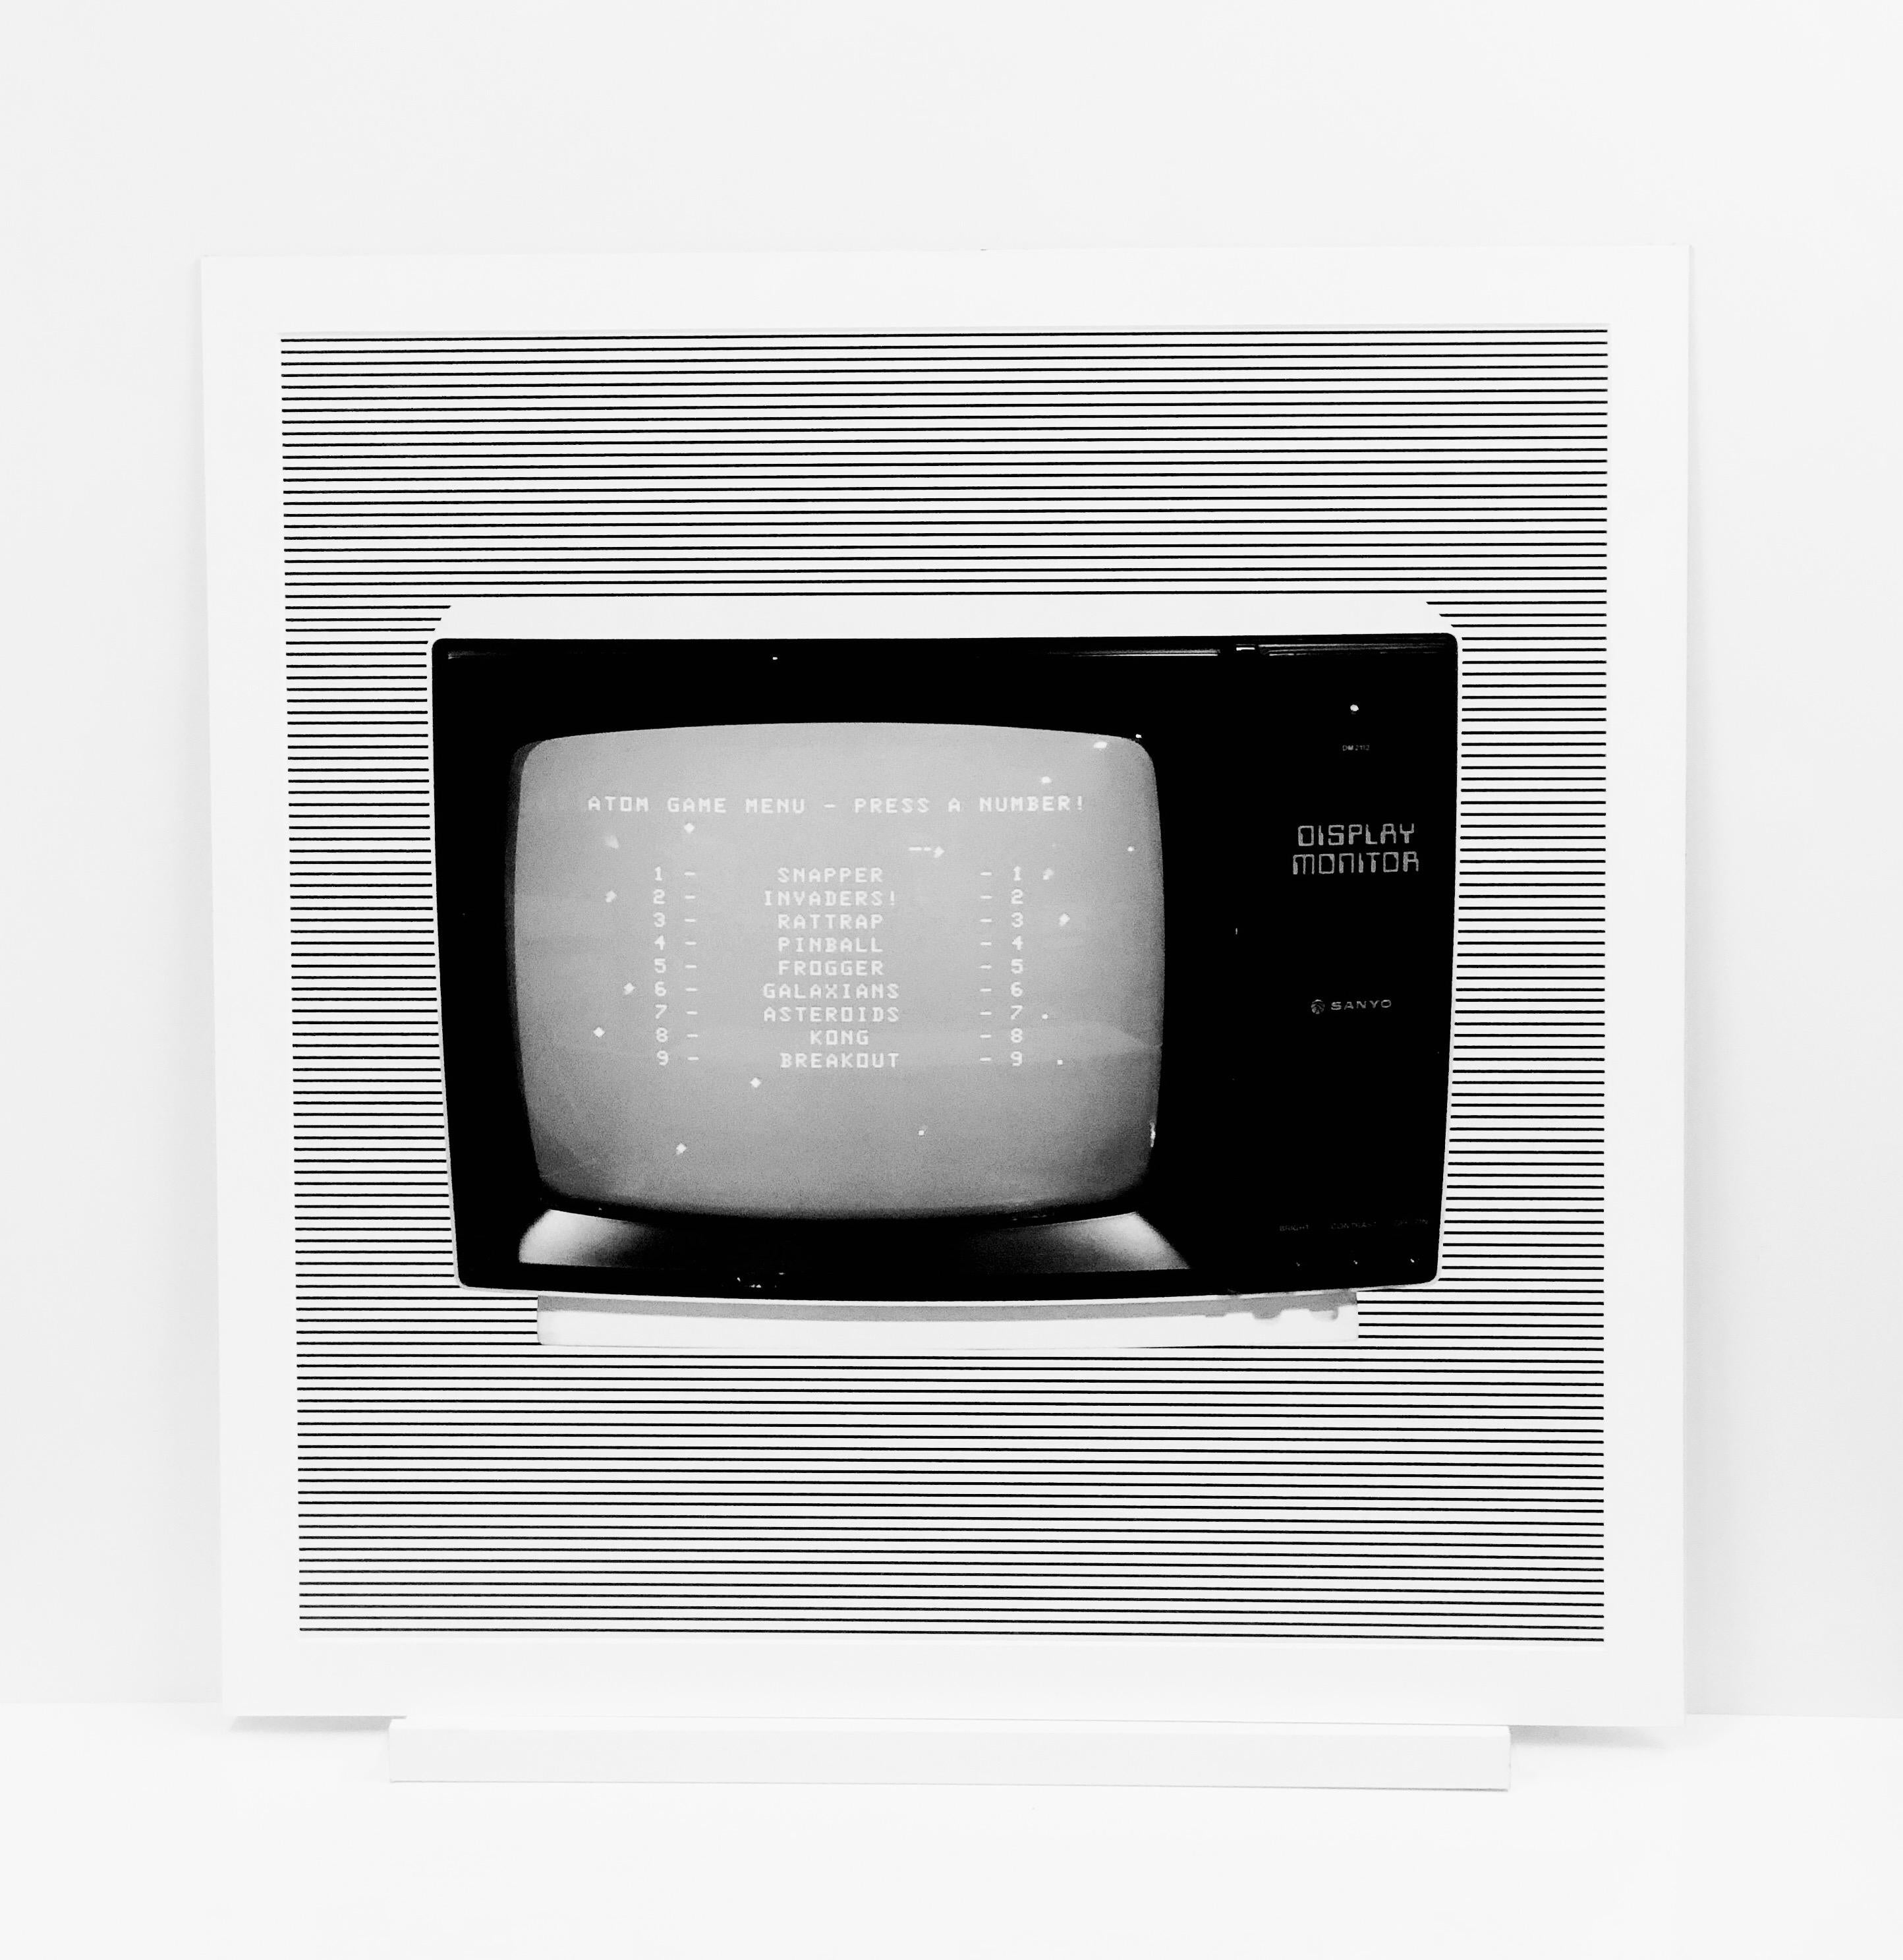 Contrast - Personal Computer Series - Print by Samuel Field